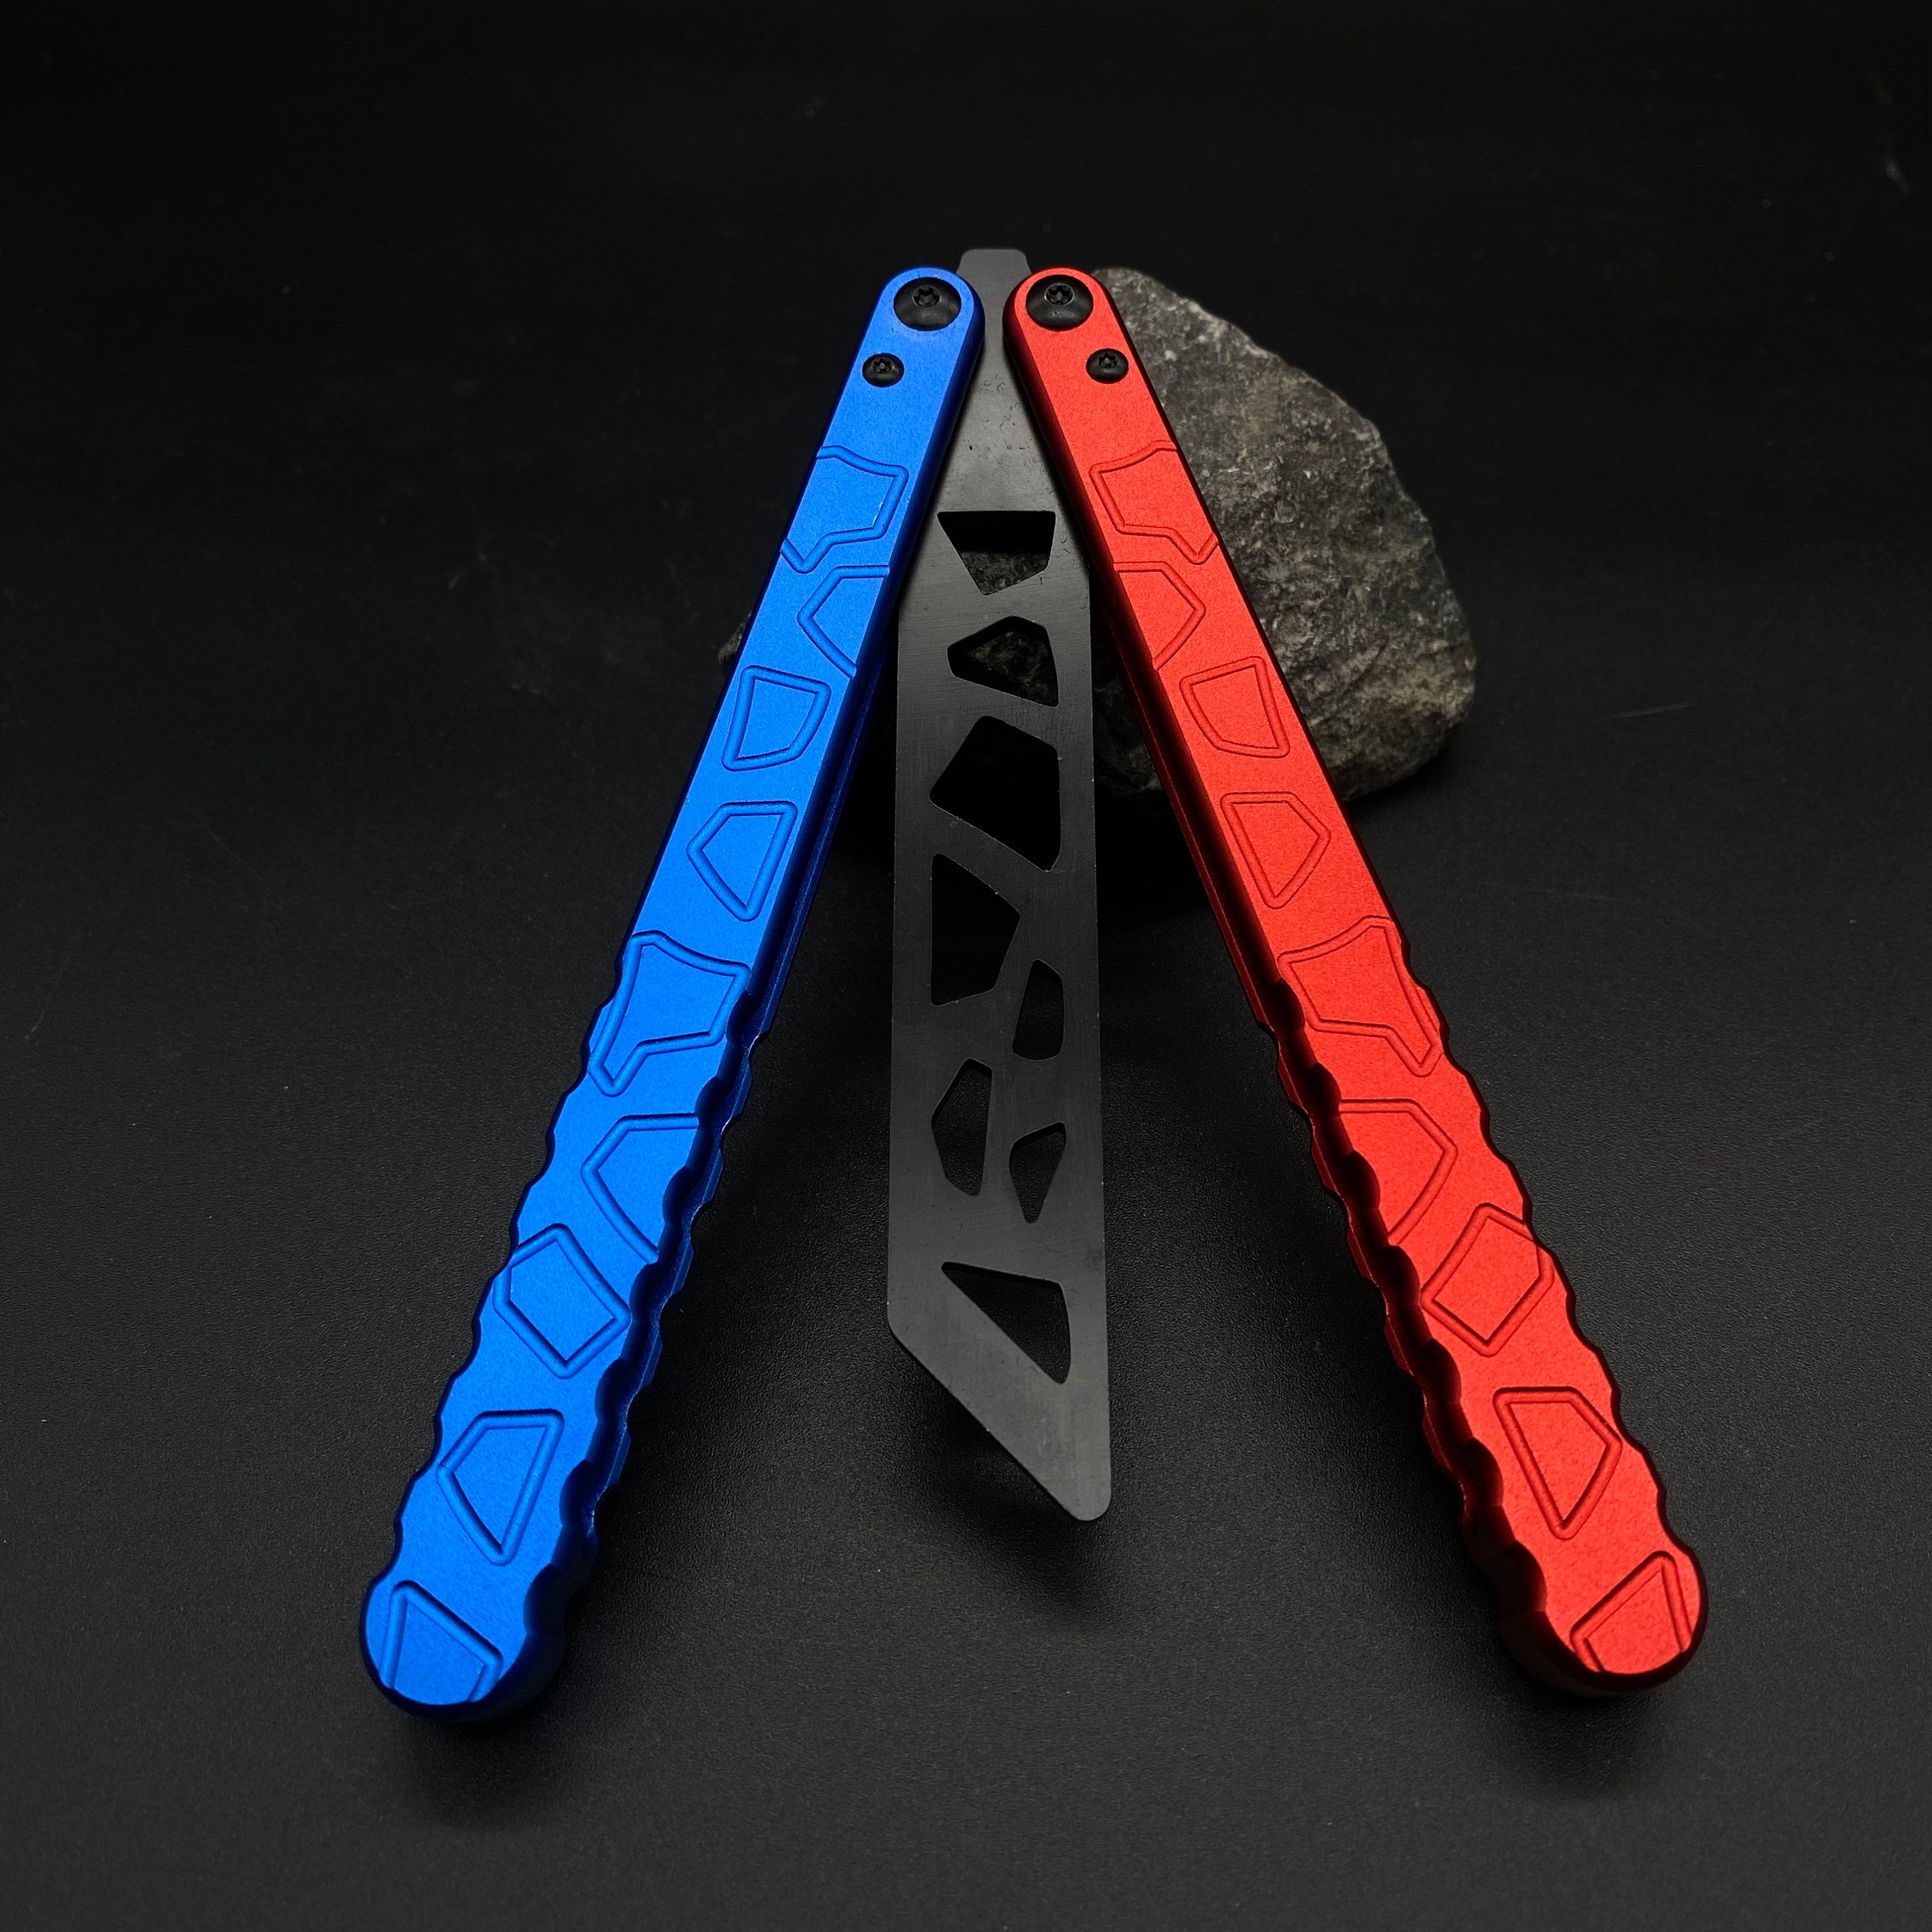 Red & Blue Butterfly Knife